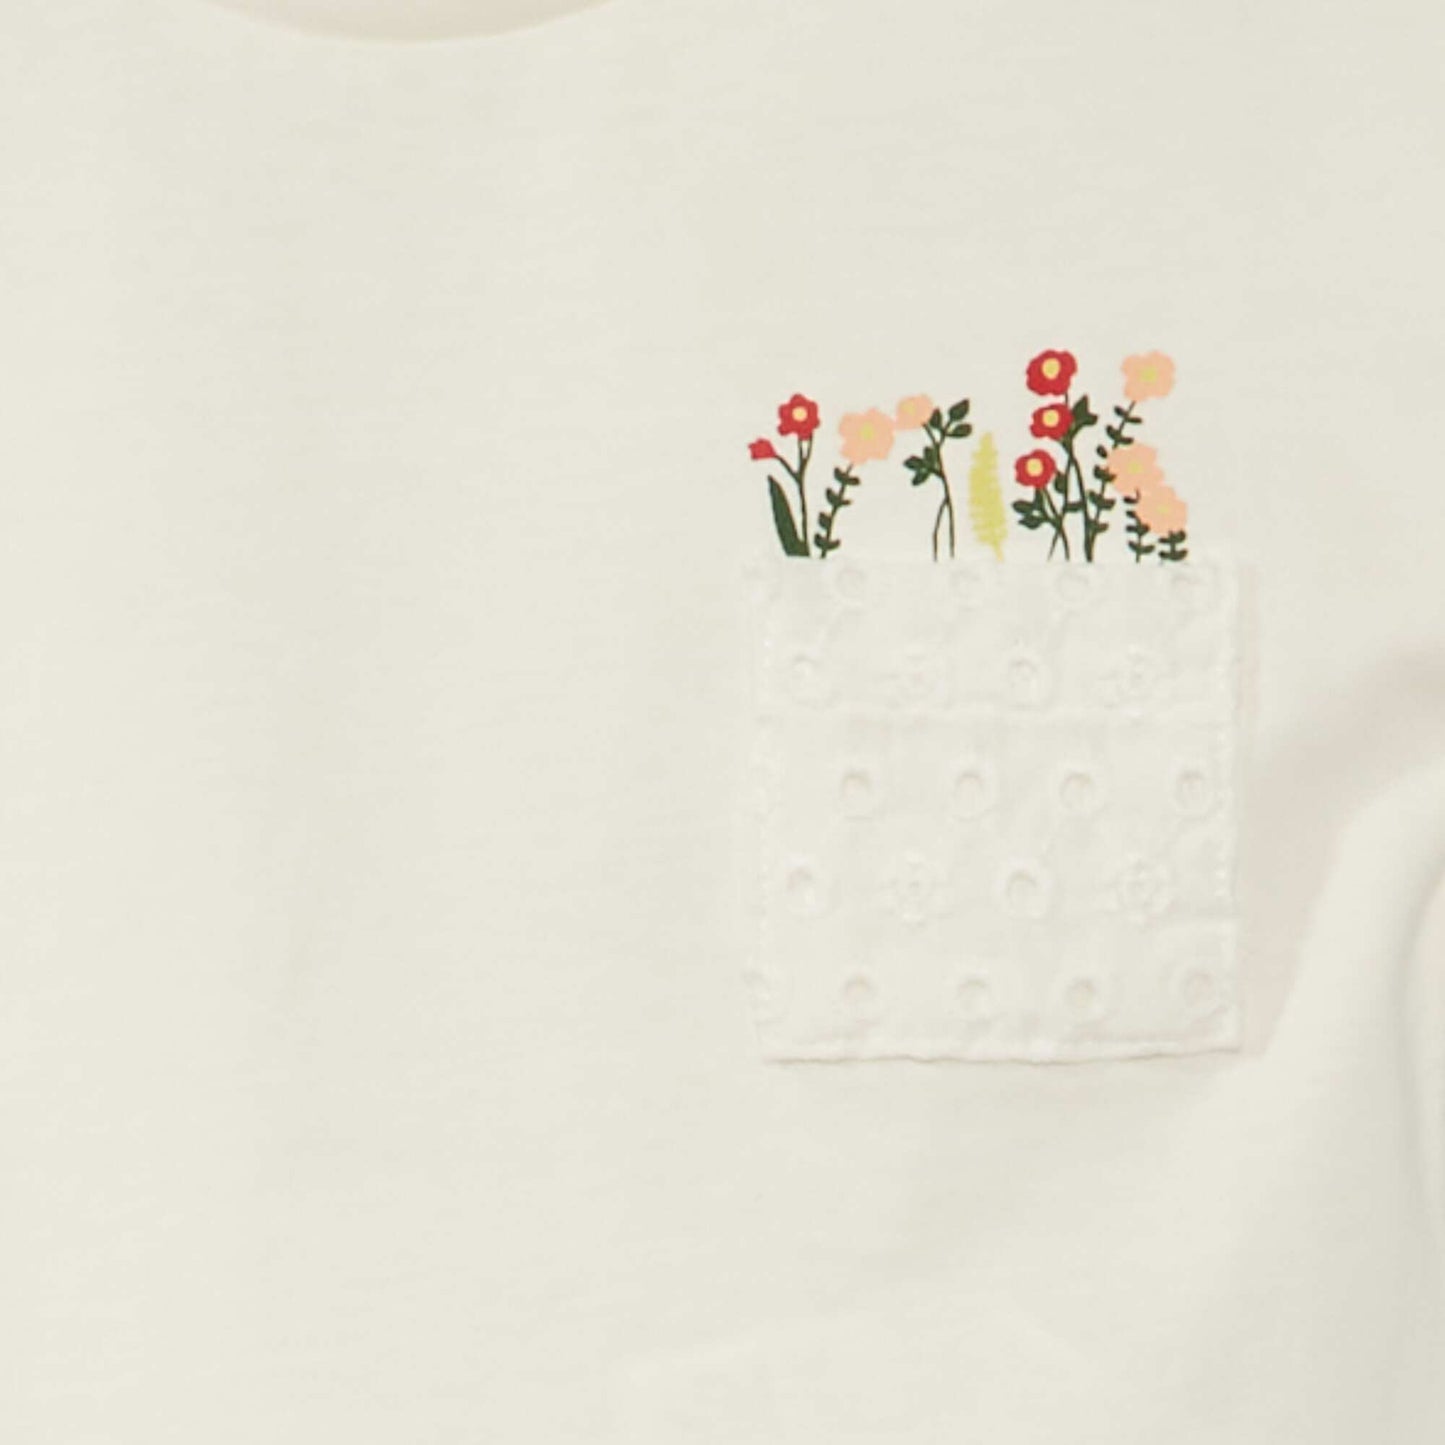 T-shirt with embroidered pocket snow white